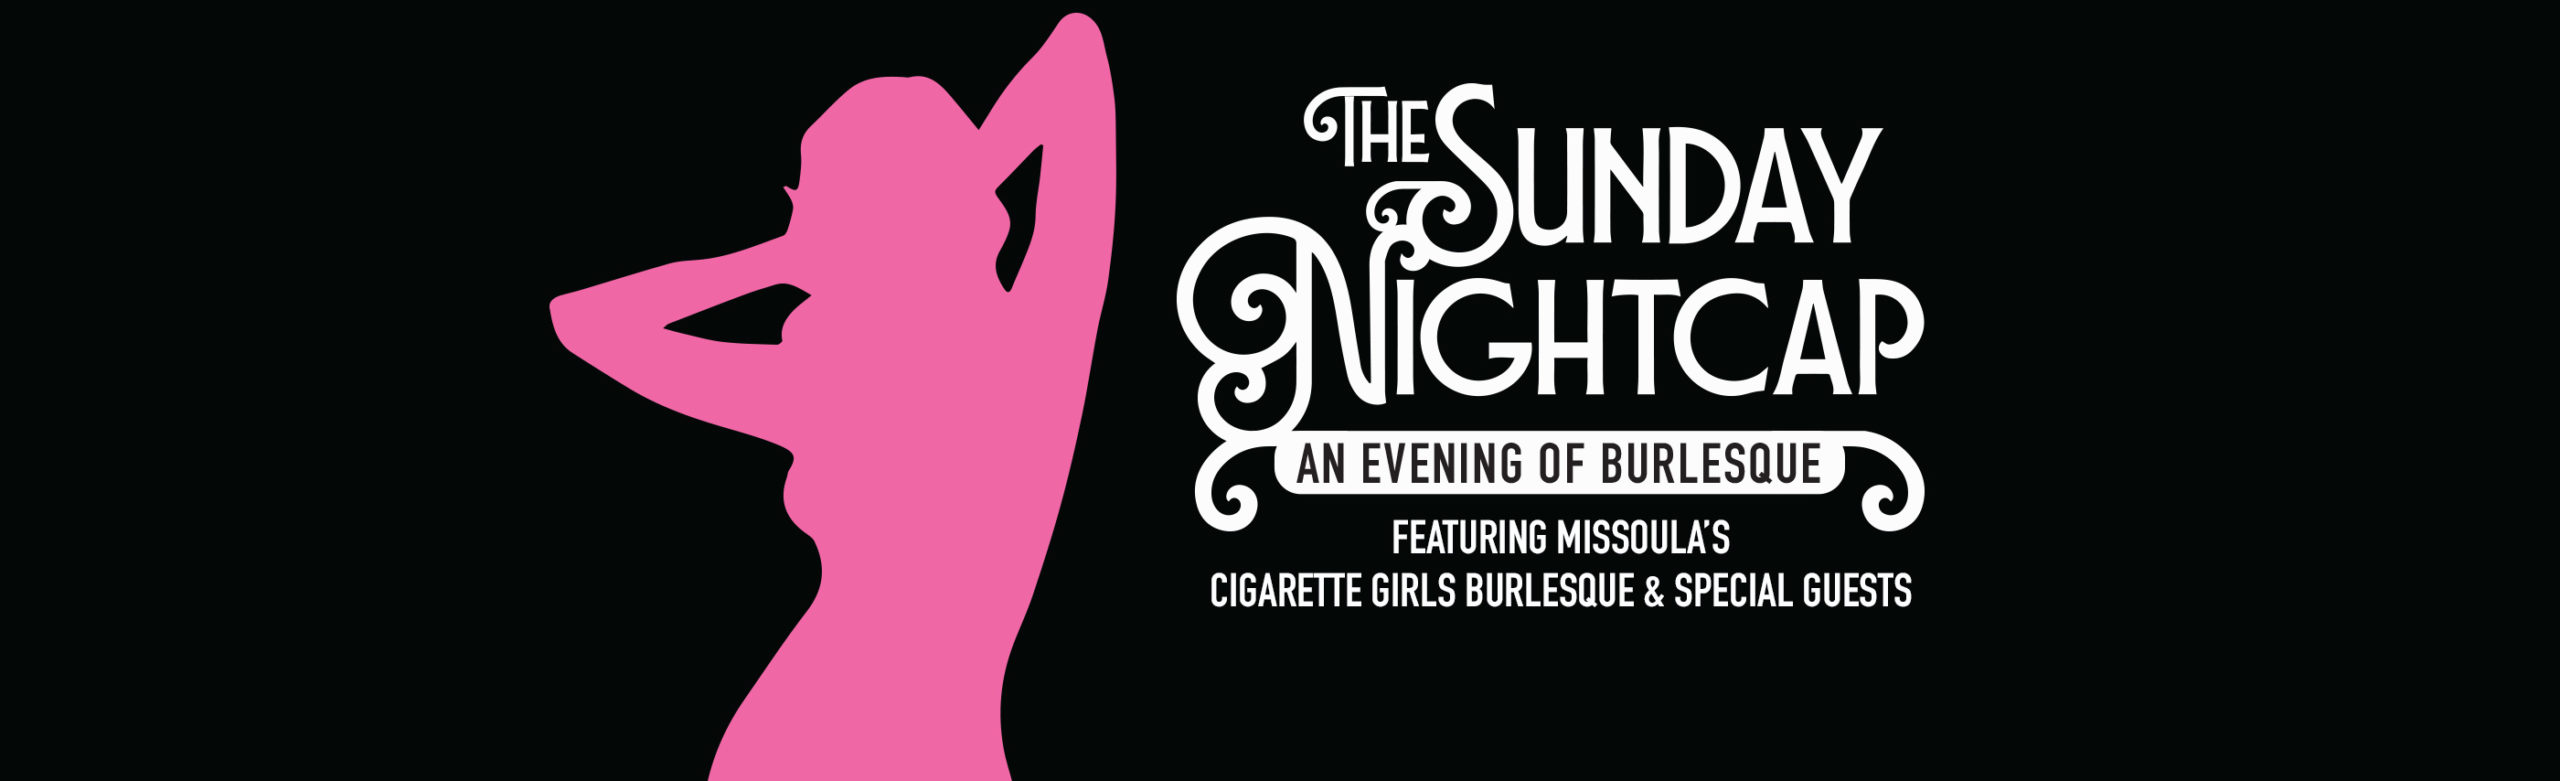 The Sunday Nightcap Burlesque Series Shimmies Its Way Into May at the Top Hat Image